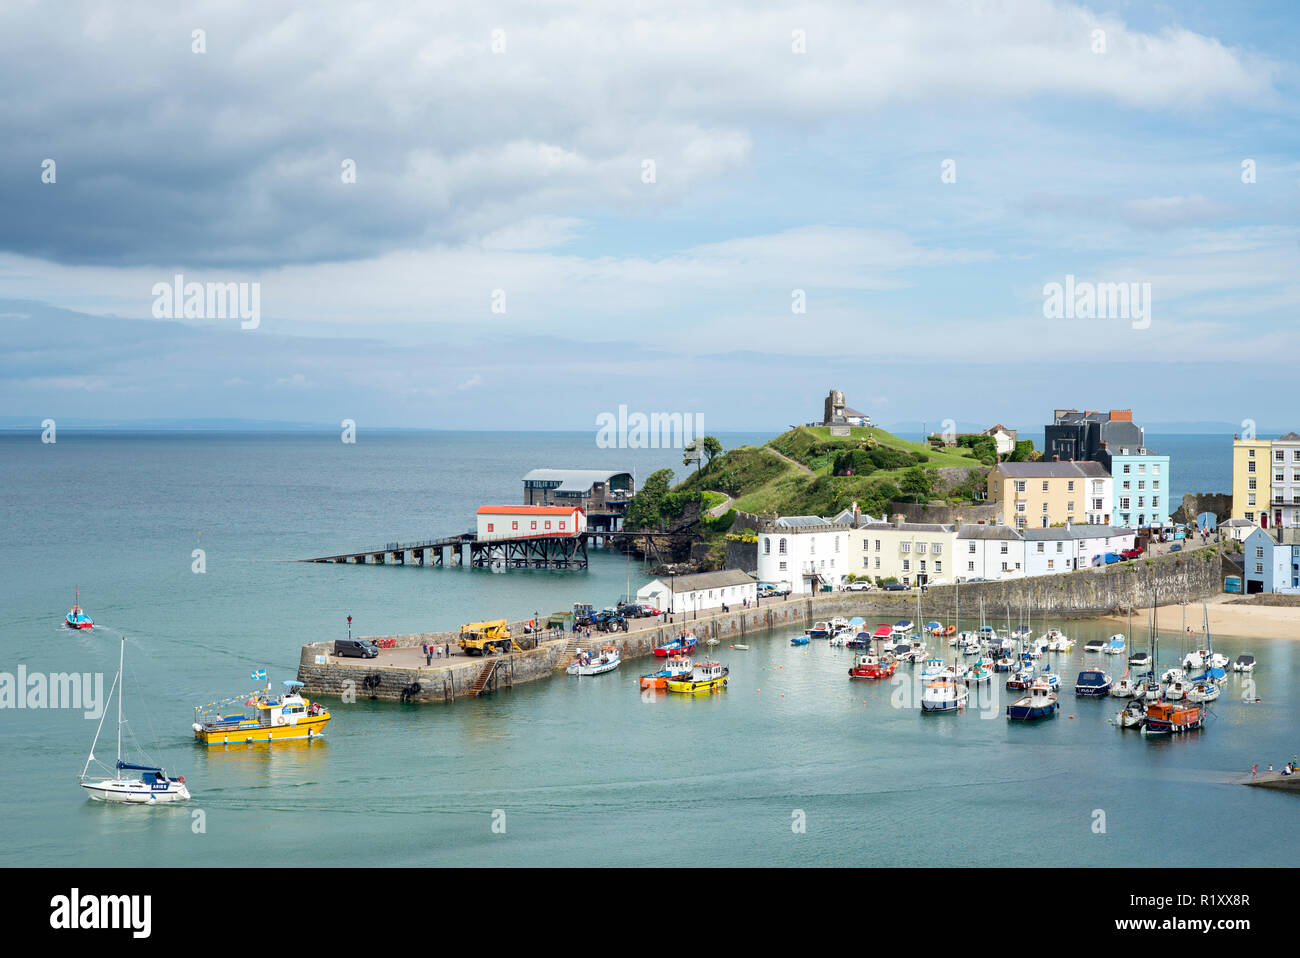 Pleasure boats - powerboats and yachts in harbour - seaside housing, lifeboat station and town, Tenby, Wales, UK Stock Photo